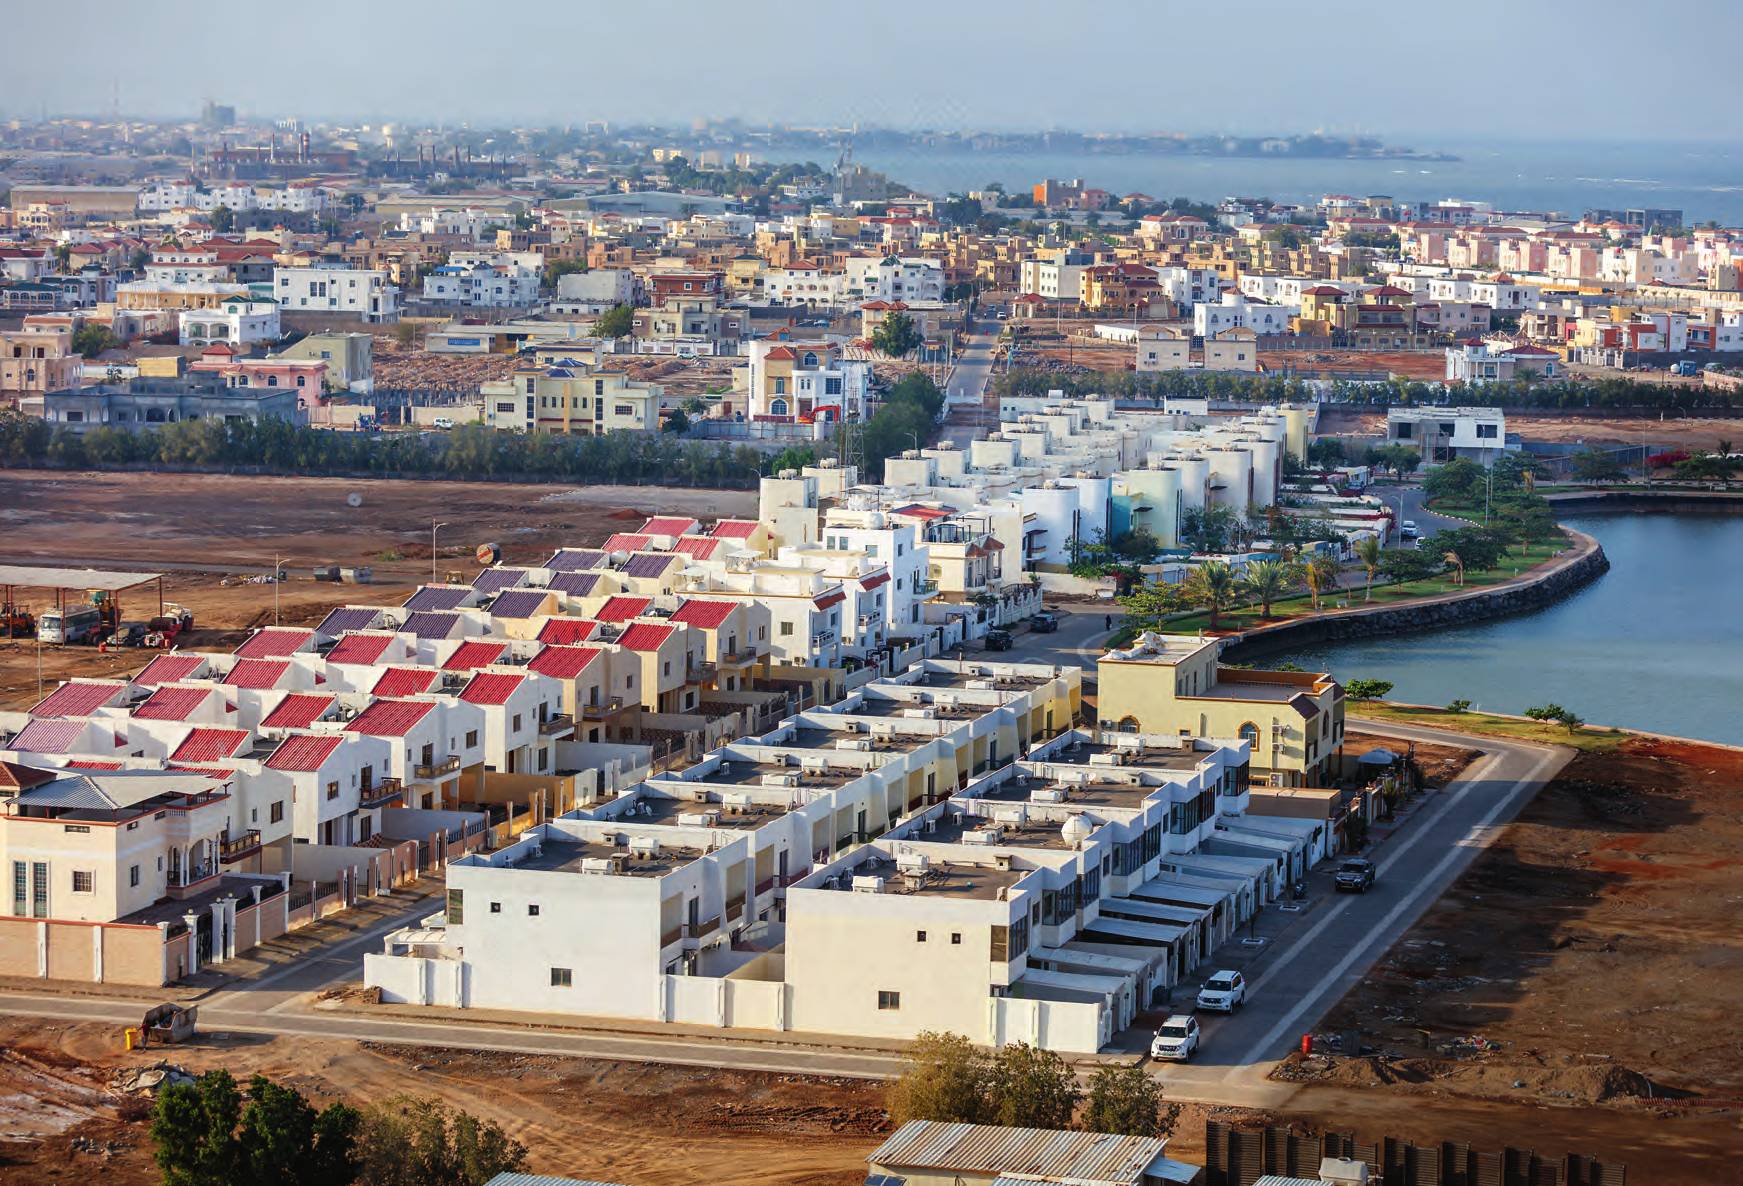 Of the 6000 housing units built since 2019, 2500 have been built by the IOG Foundation. Here in Djibouti city.PATRICK ROBERT